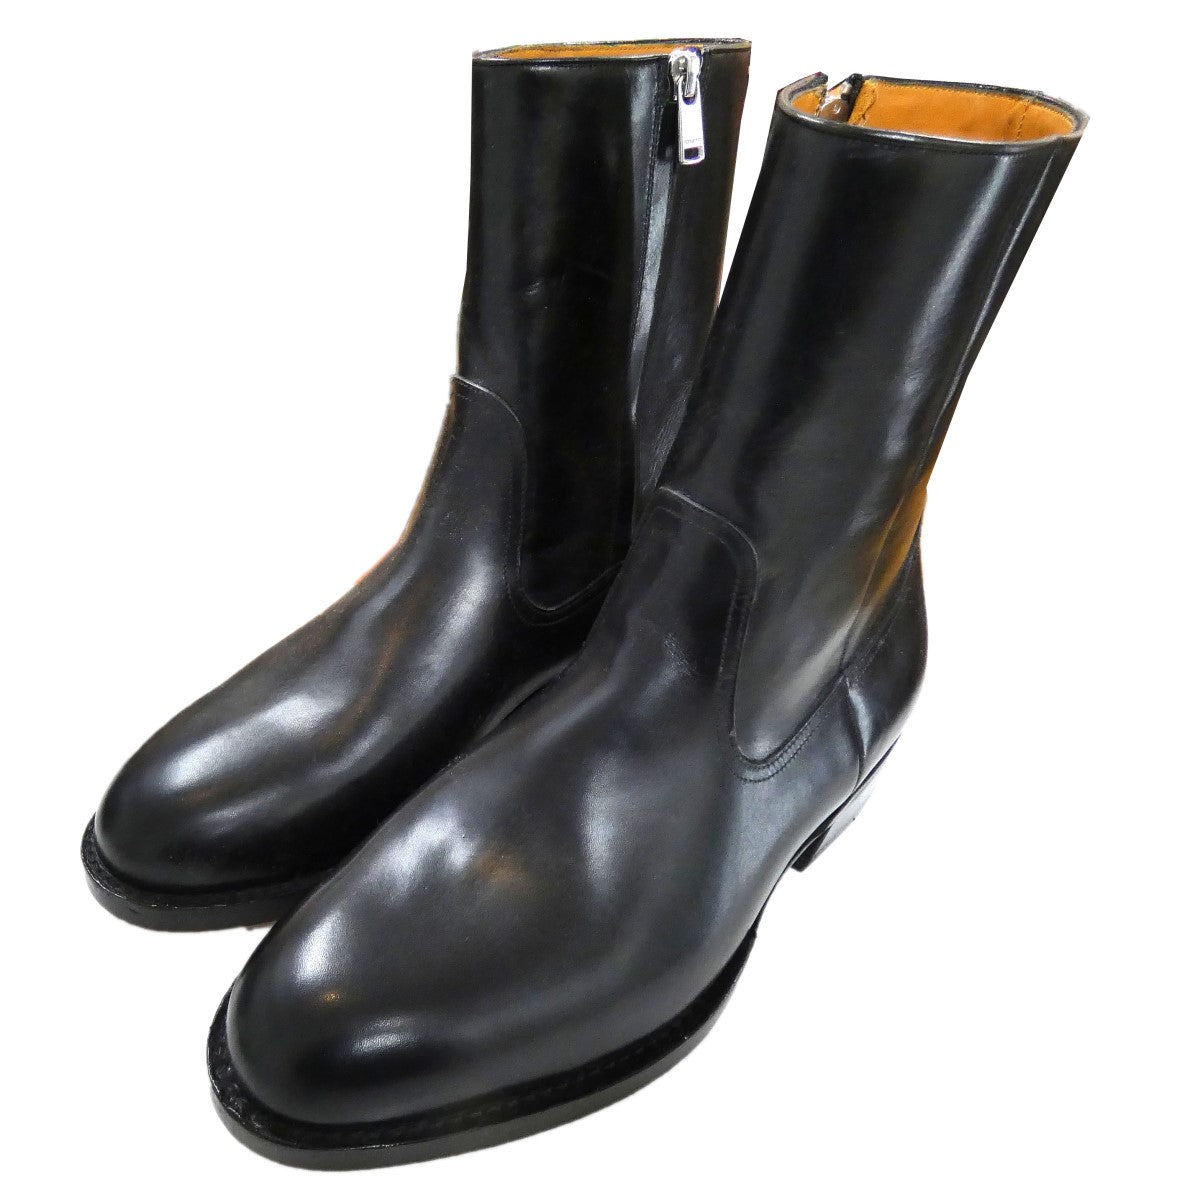 「RANCHER ZIP UP BOOT COW LEATHER」ランチャーサイドZIPブーツ 【6月13日値下】